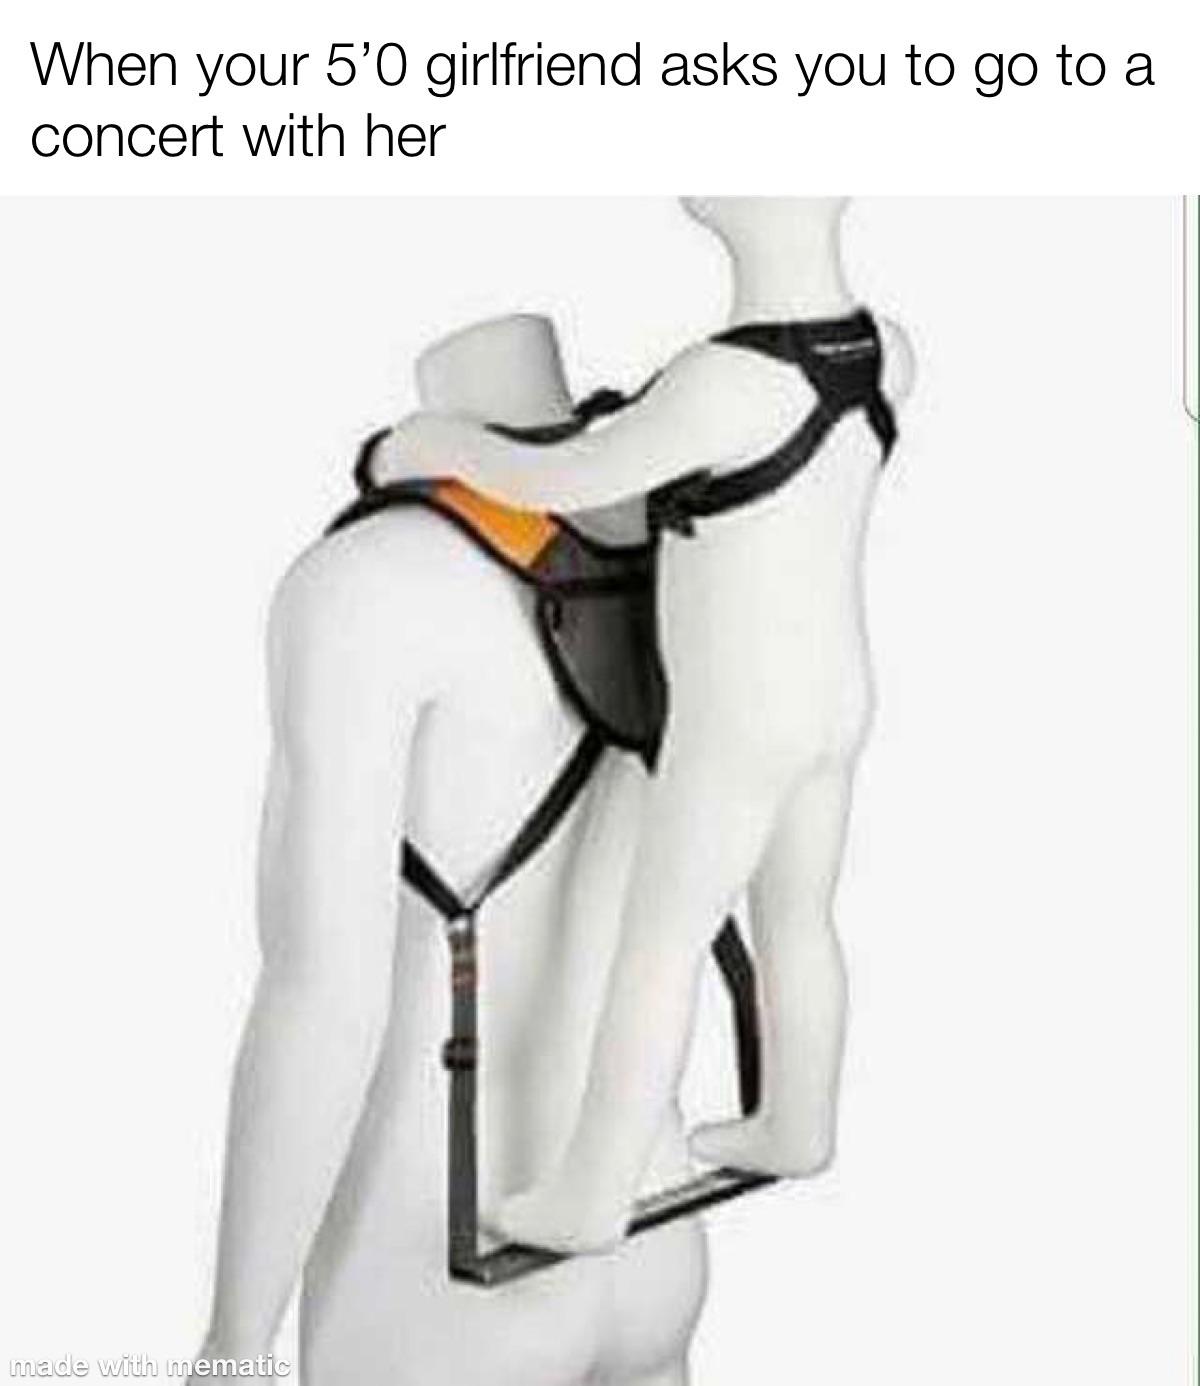 child standing back carrier - When your 5'O girlfriend asks you to go to a concert with her made with mematic